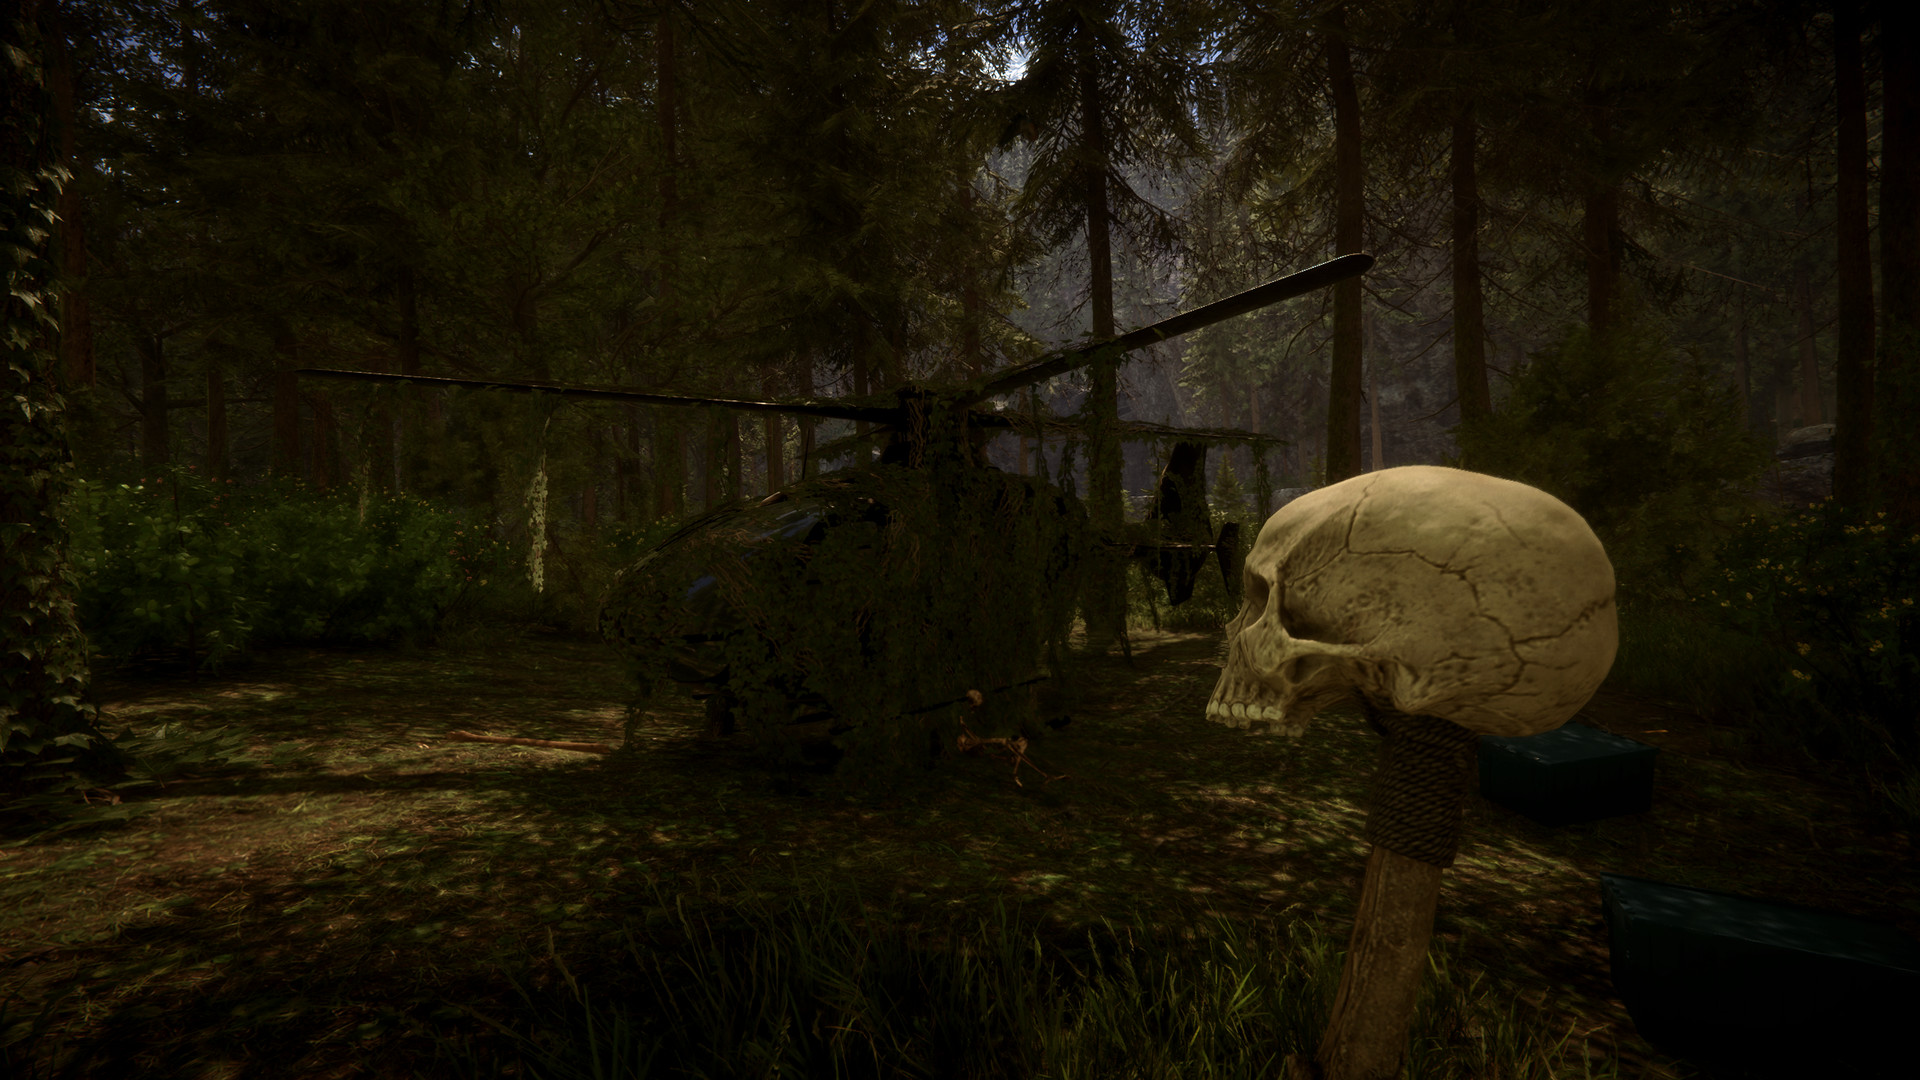 Sons of the Forest' early access: Release date, price, and platform details